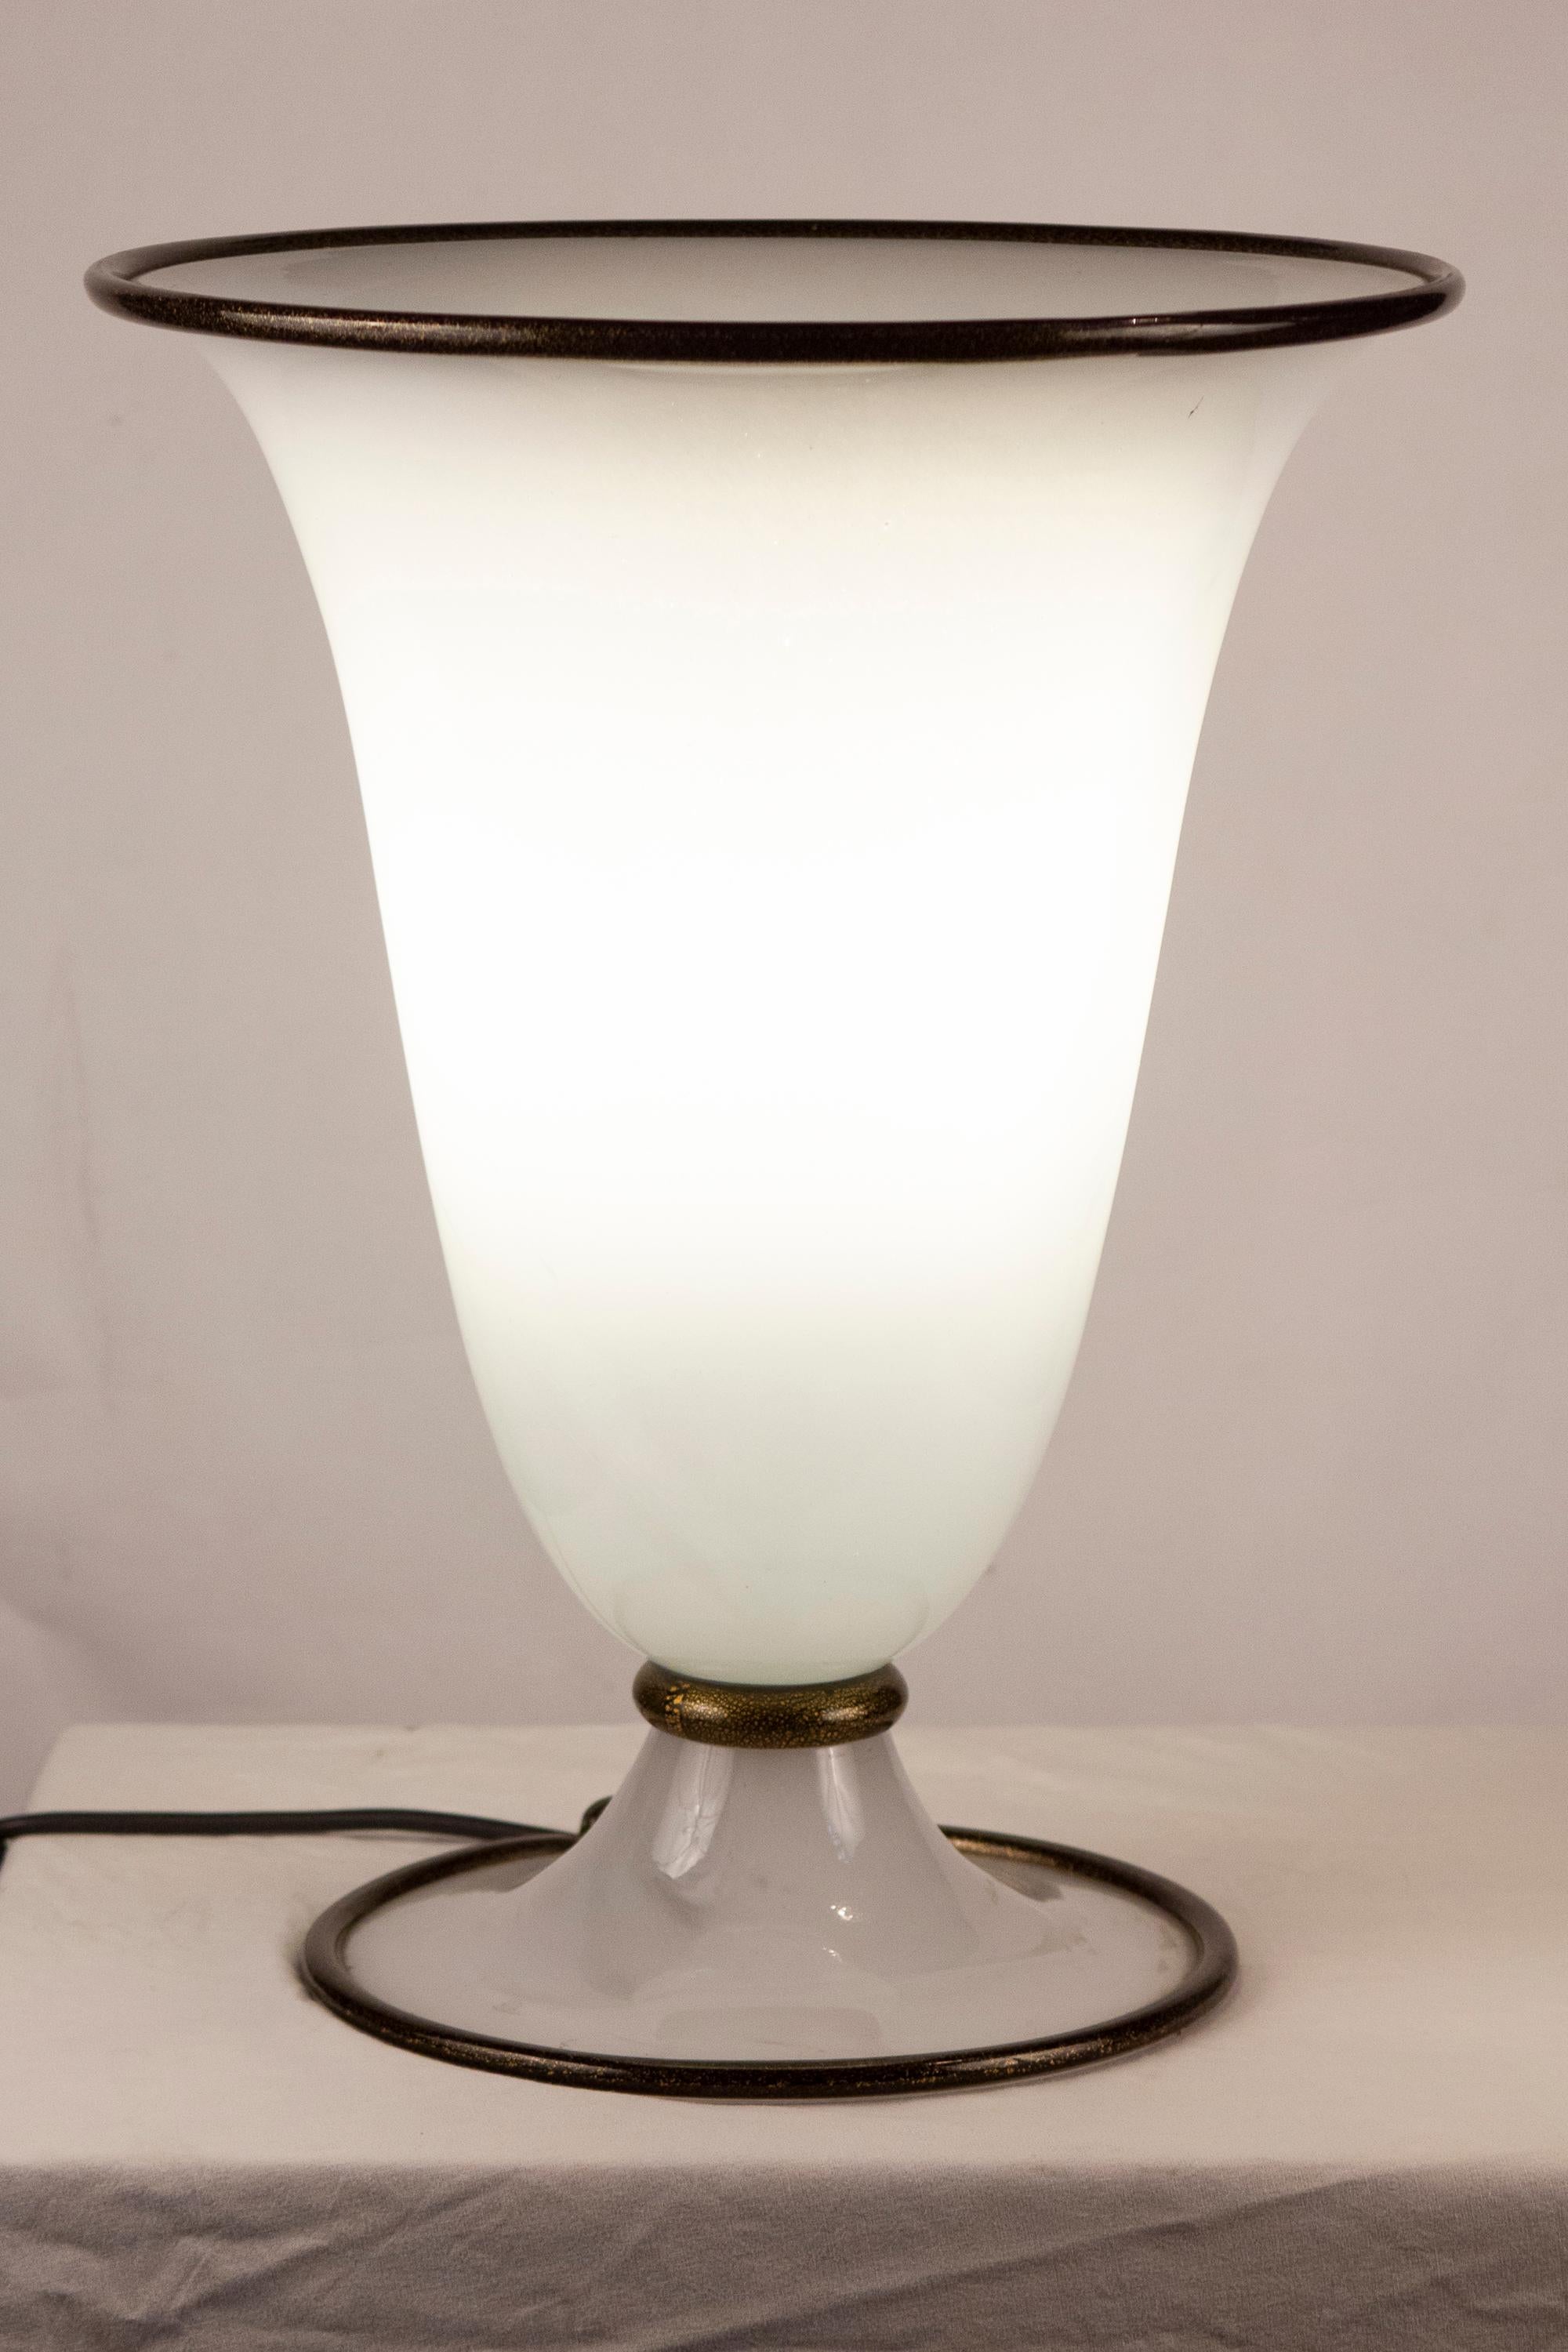 Elegant opaline Murano glass Table Lamp , contoured by  black  decoration with gold intrusion .
 by Barovier & Toso Primavera Model 6211  1980' with original label .
 
 Perfect Vintage condition . 
1 E27 light bulb 40W
 